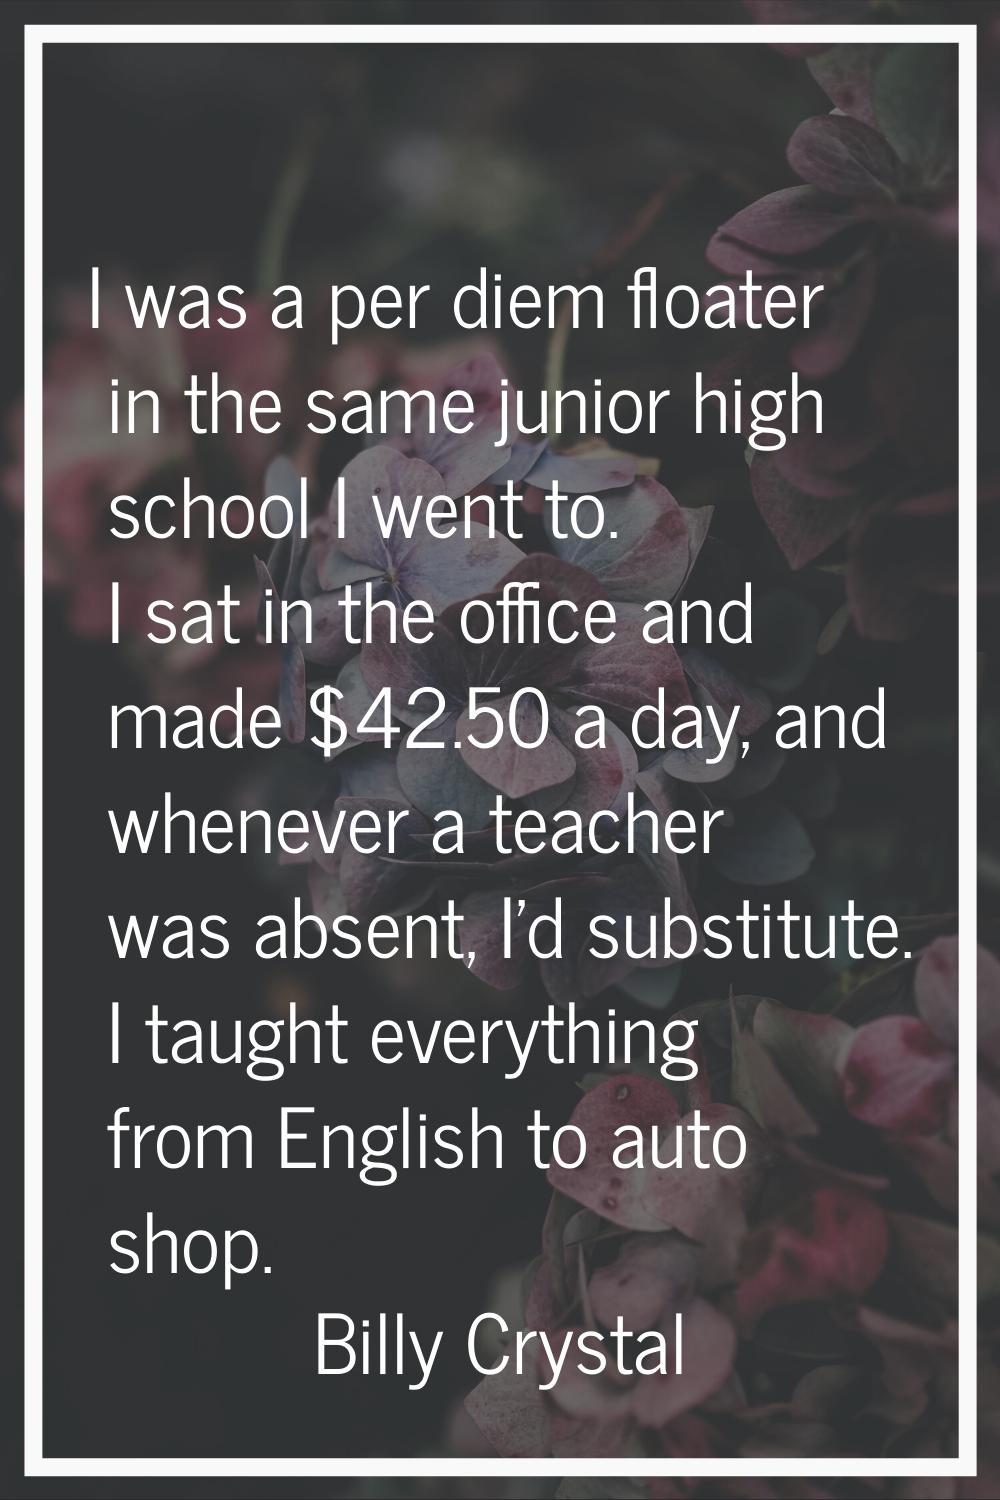 I was a per diem floater in the same junior high school I went to. I sat in the office and made $42